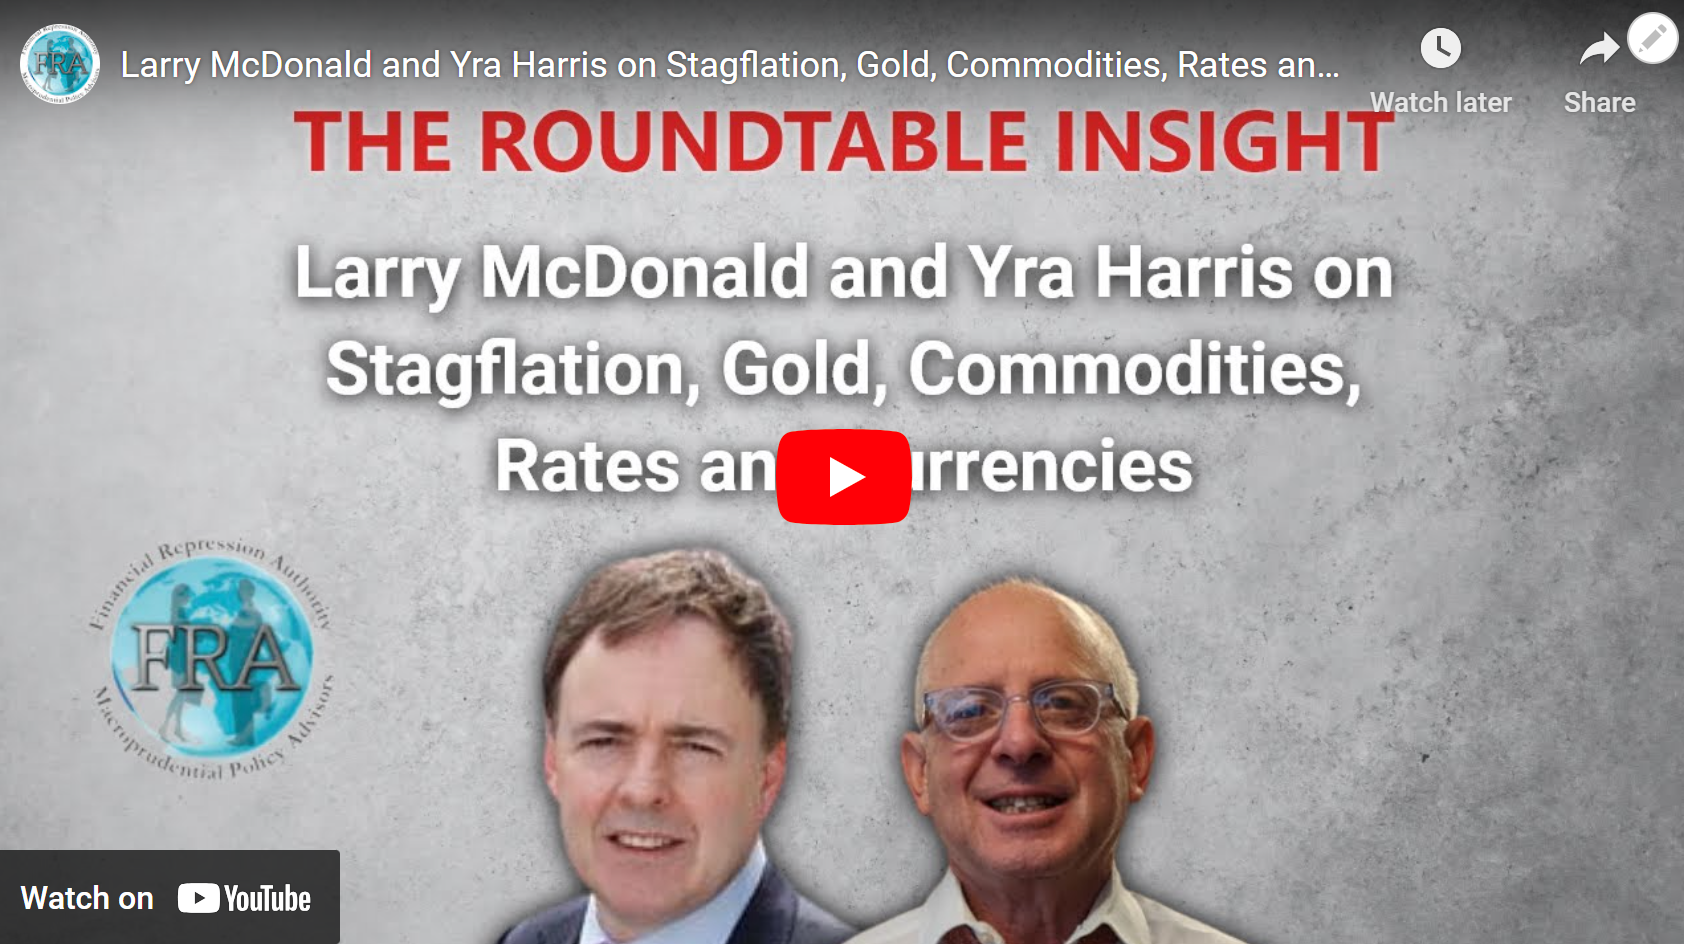 The Roundtable Insight: Larry McDonald and Yra Harris on Stagflation, Gold, Commodities, Rates and Currencies